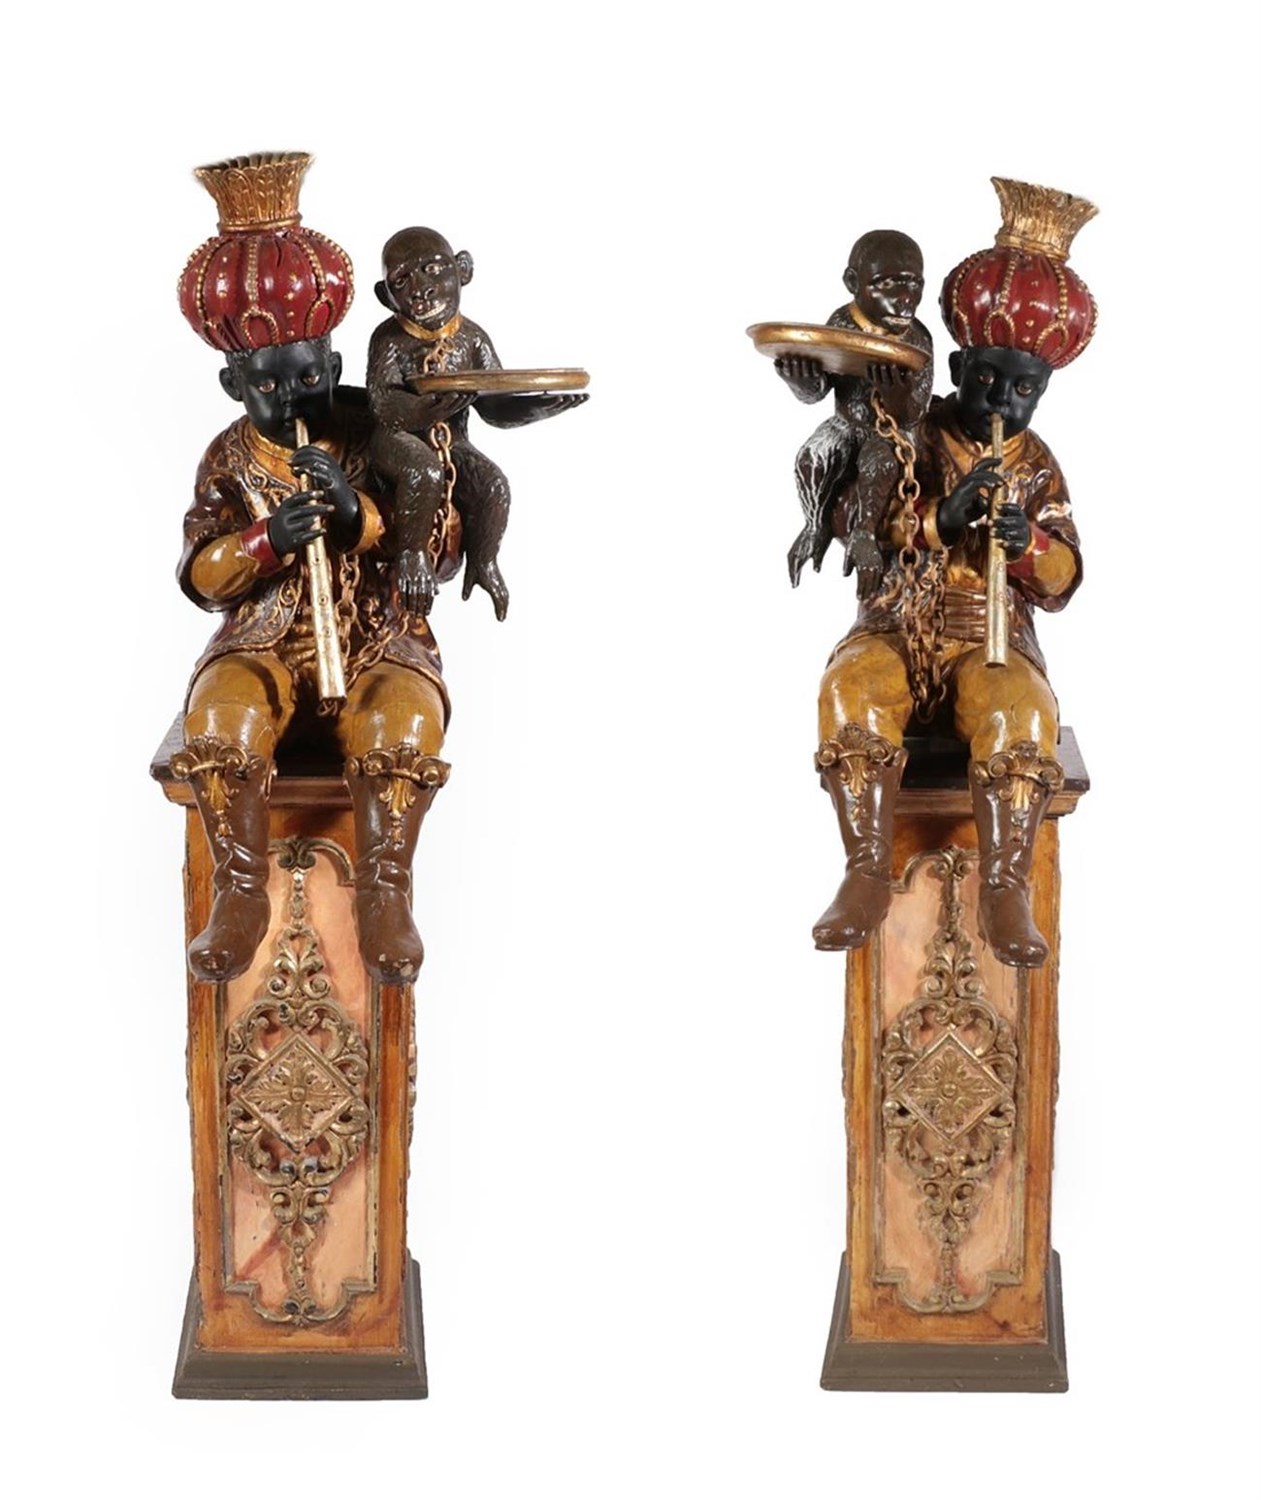 Lot 67 - A Pair of Venetian Polychrome Decorated and Parcel Gilt Blackamoor Figures, late 19th century, each